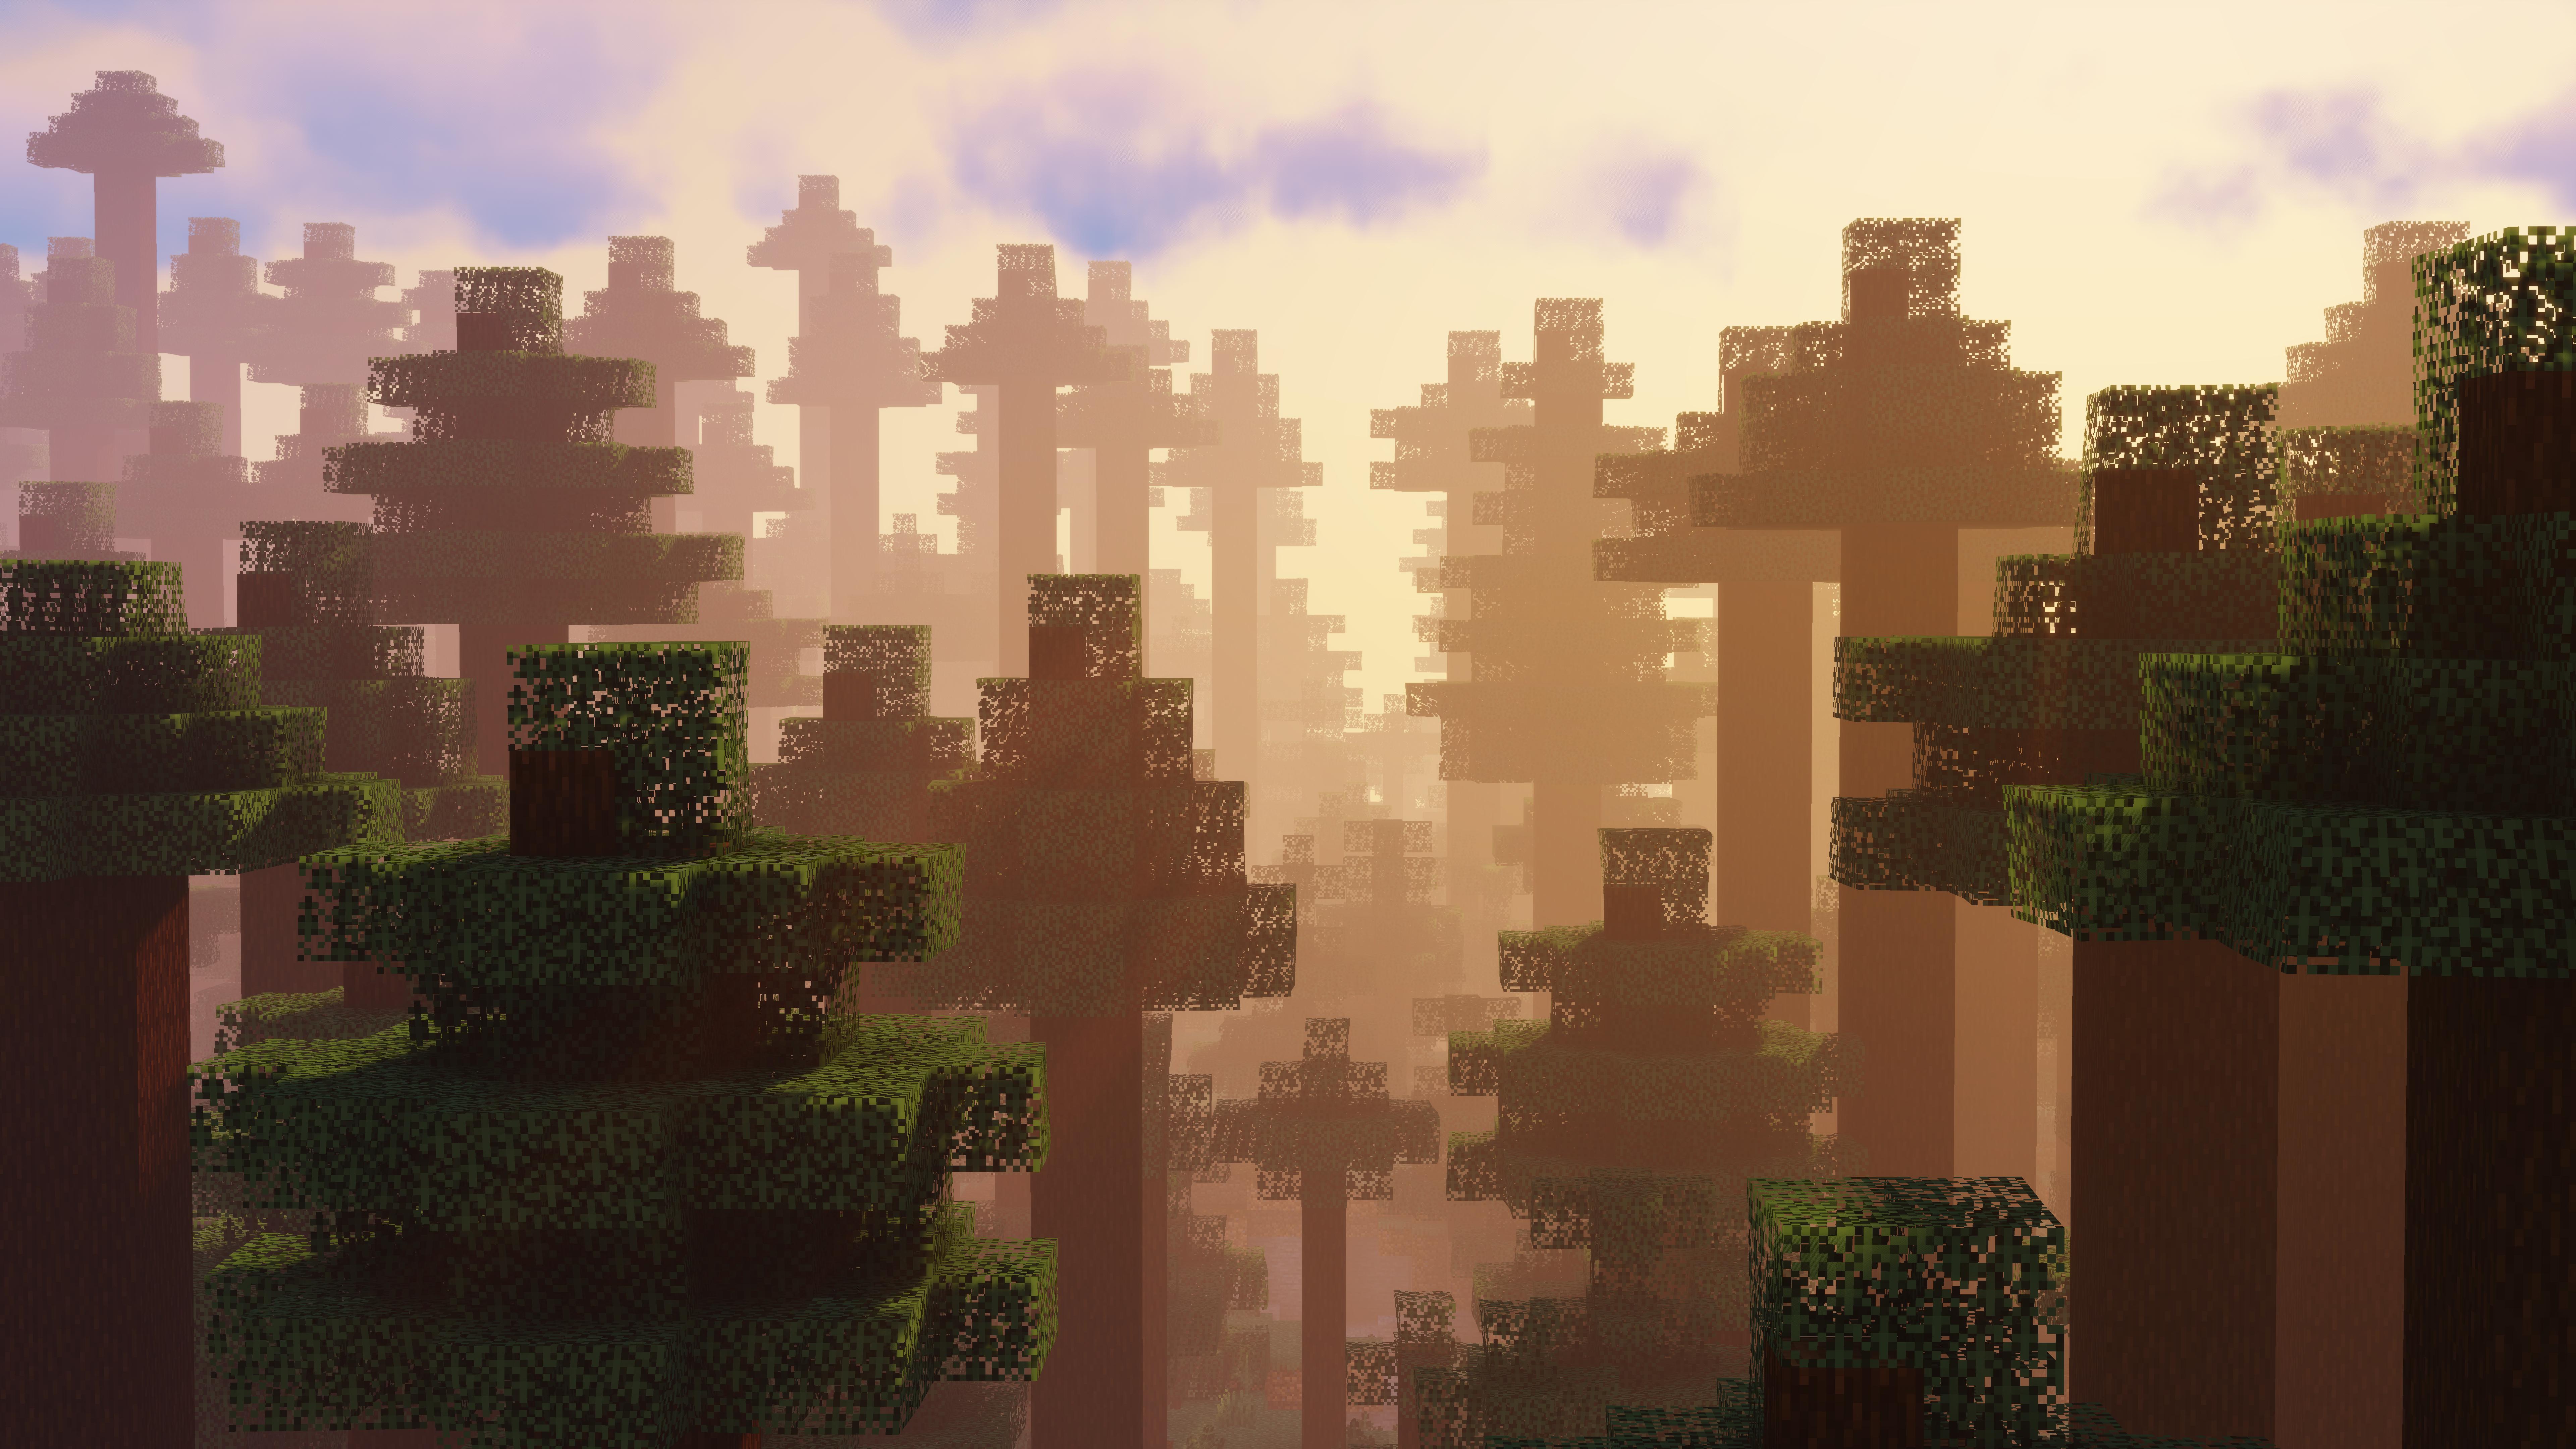 650+ Minecraft HD Wallpapers and Backgrounds